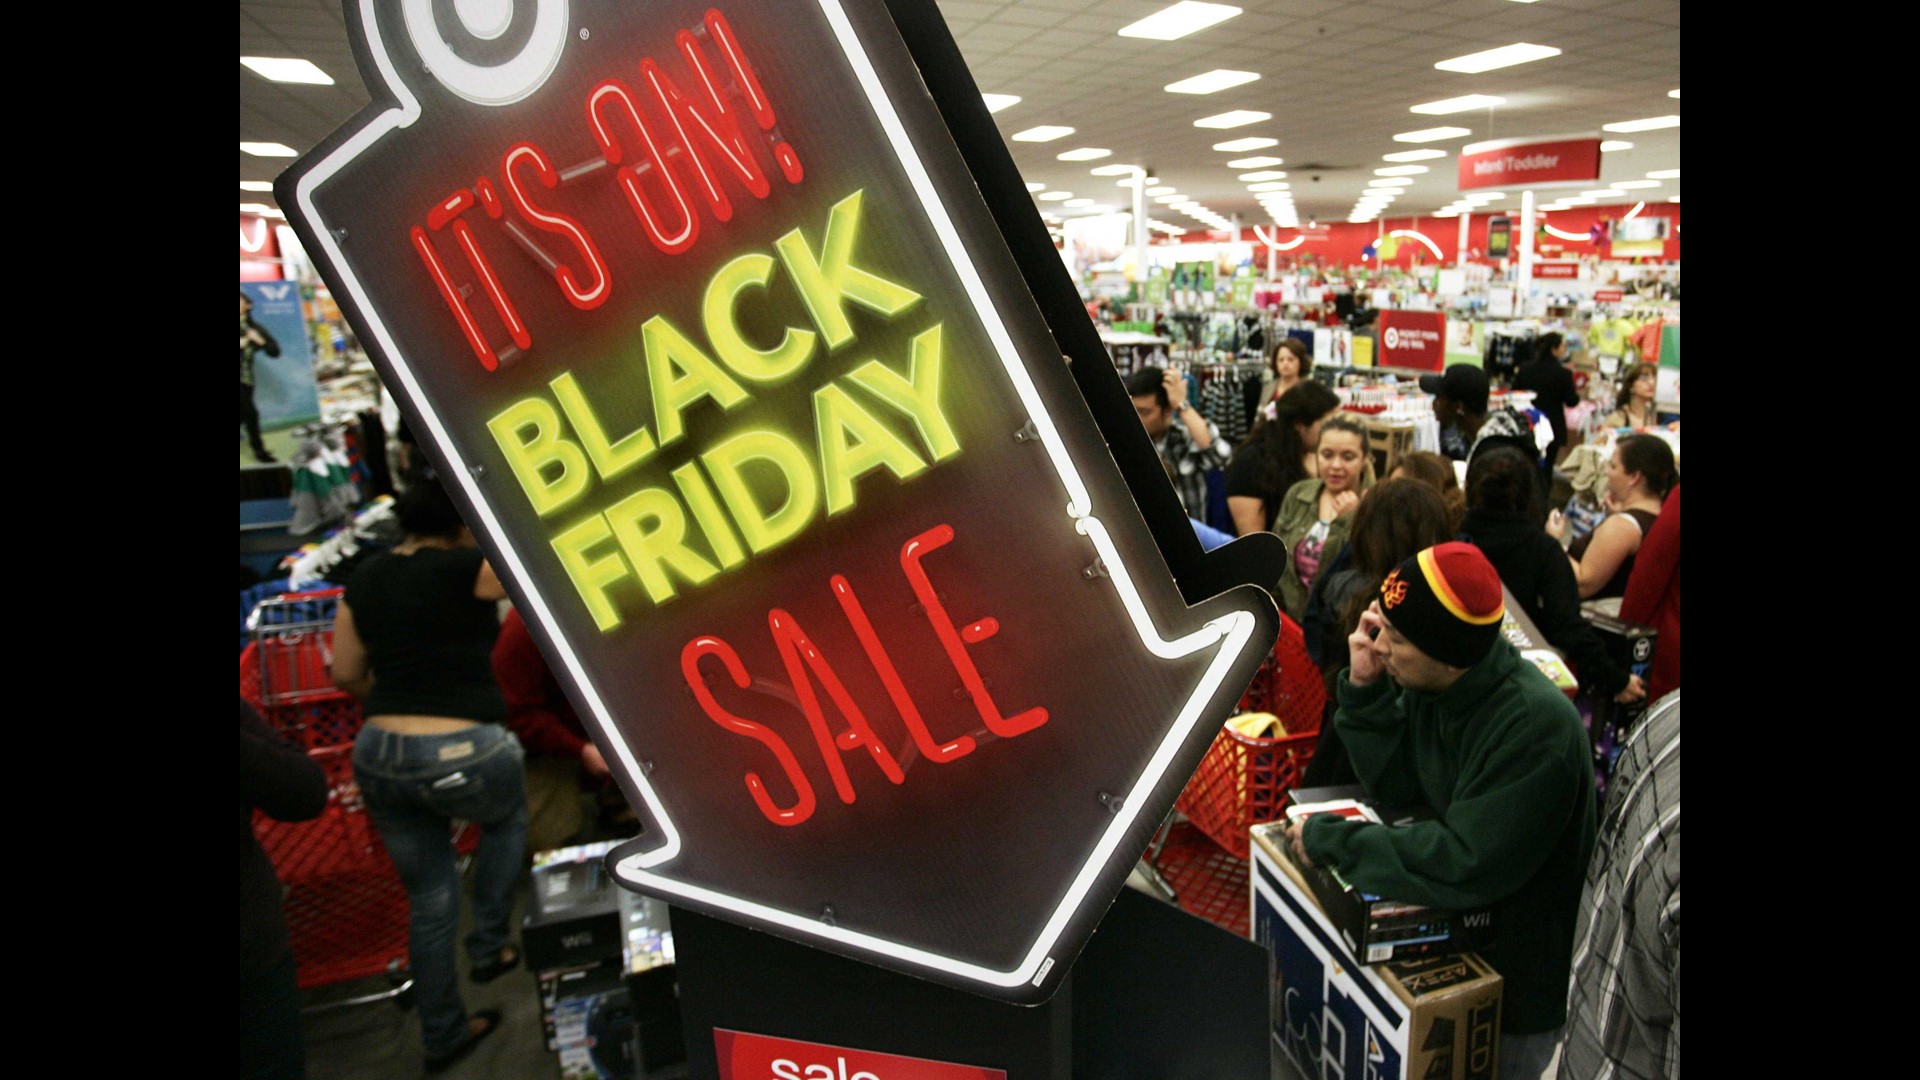 Best Buy isn't waiting for the holidays. The electronics retailer is getting a jump by offering Black Friday deals in October.